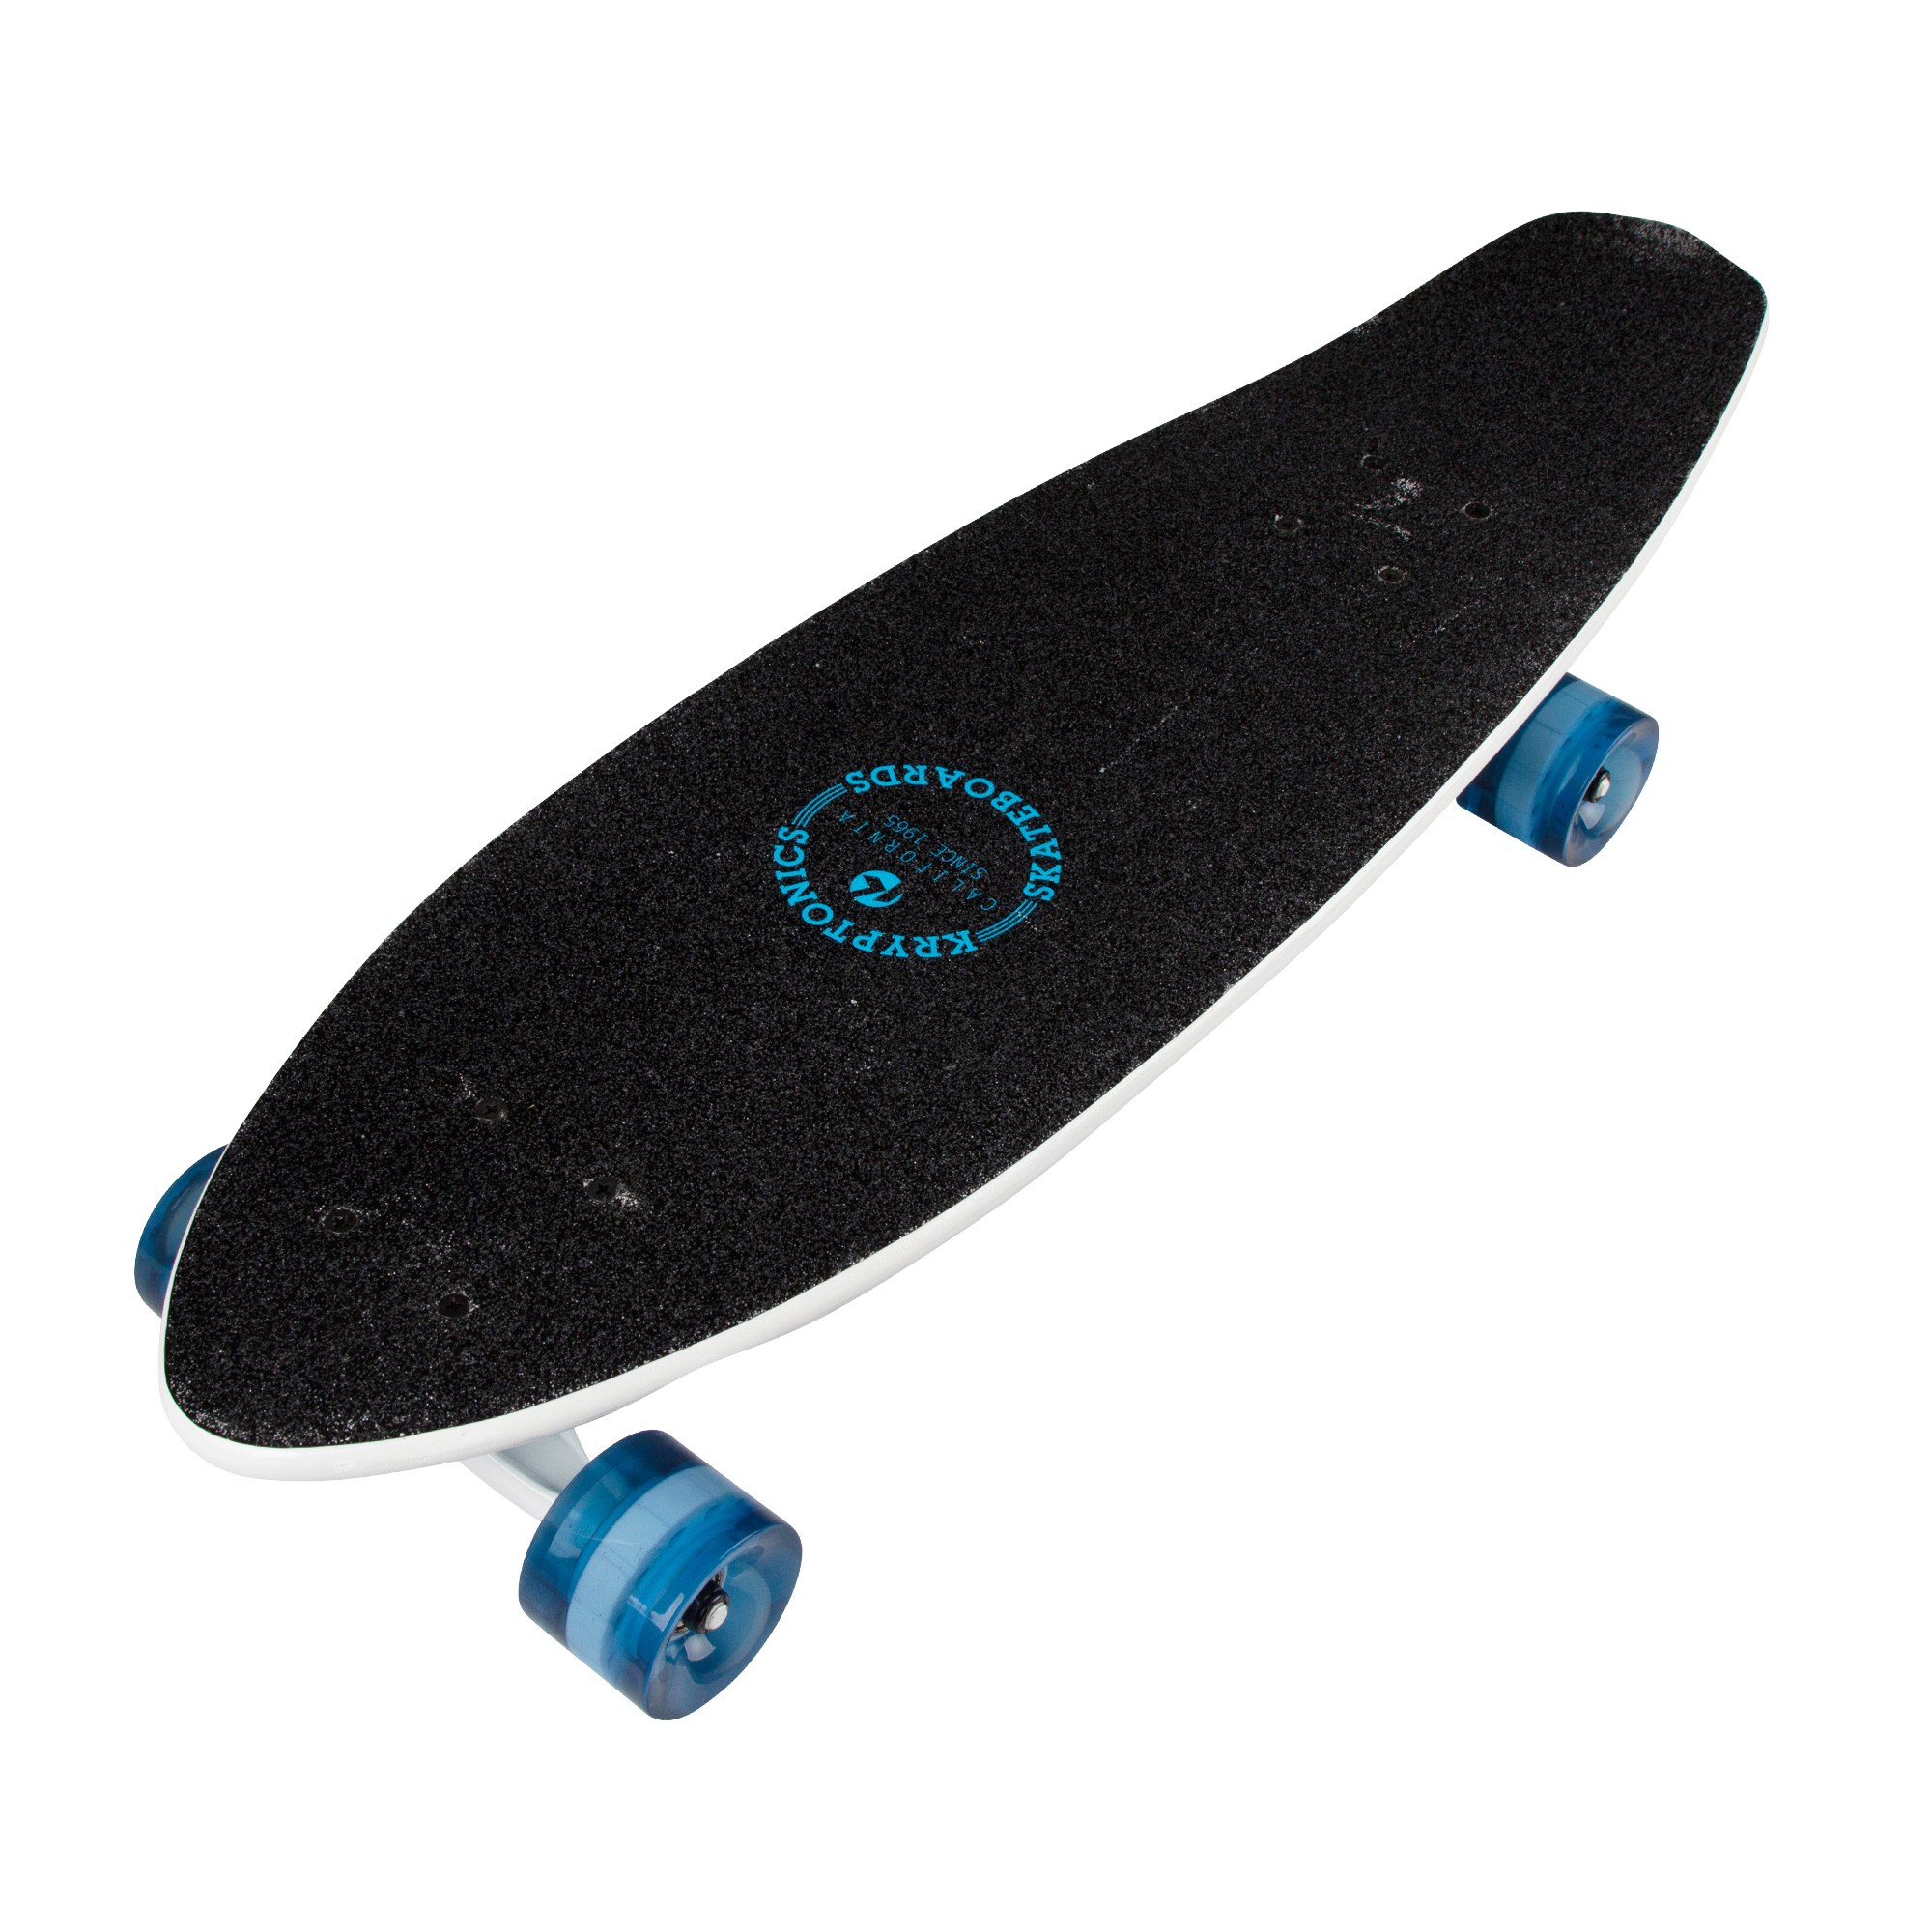 Kryptonics 28 In. Complete Cruiser Skateboard (28 In. x 8 In.) - Wave of Life - image 4 of 8